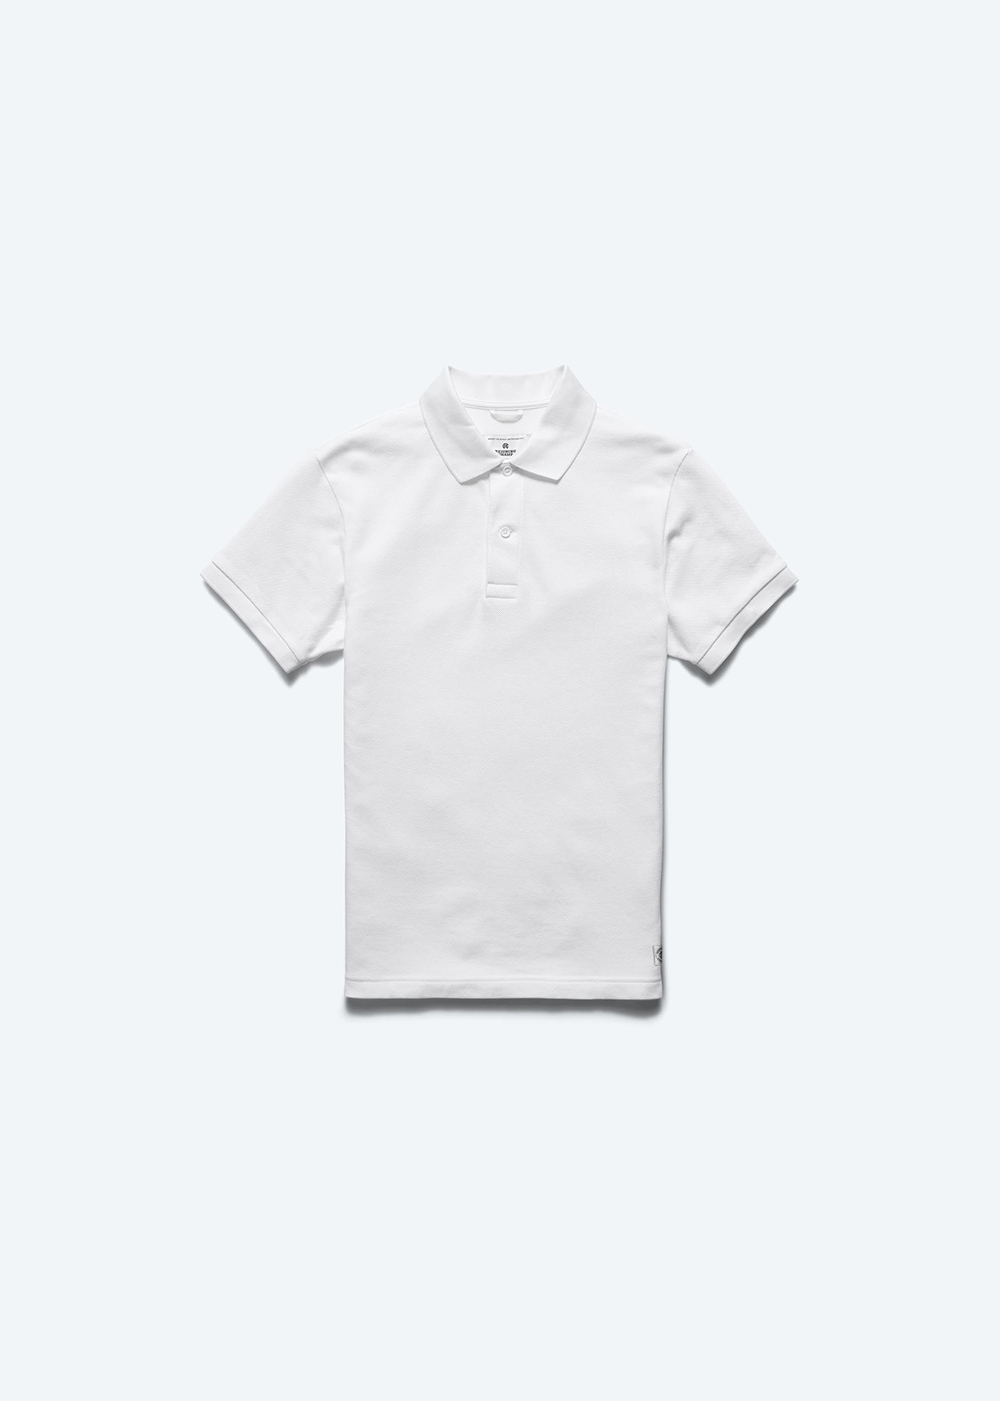 Athletic Pique Polo - White - Reigning Champ Canada - Danali - RC-1471